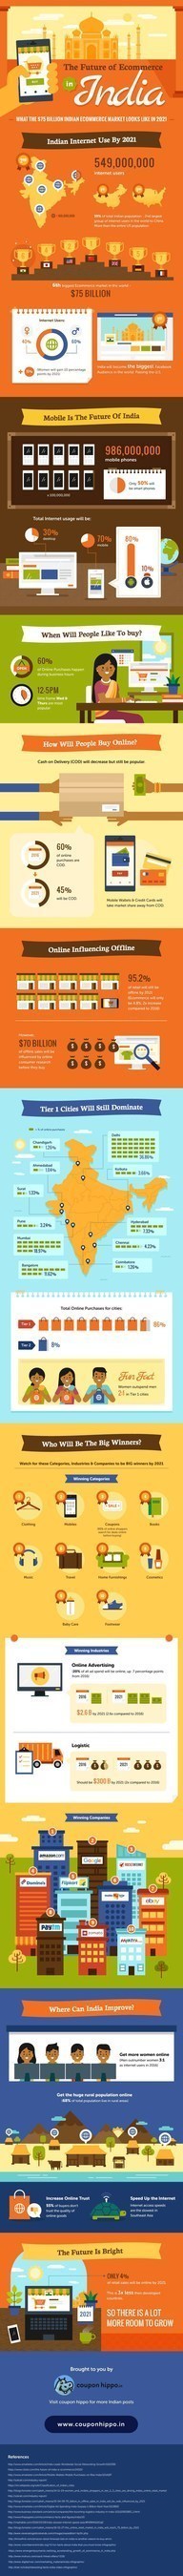 The infographic that was the result of the ecommerce study done by Coupon Hippo.